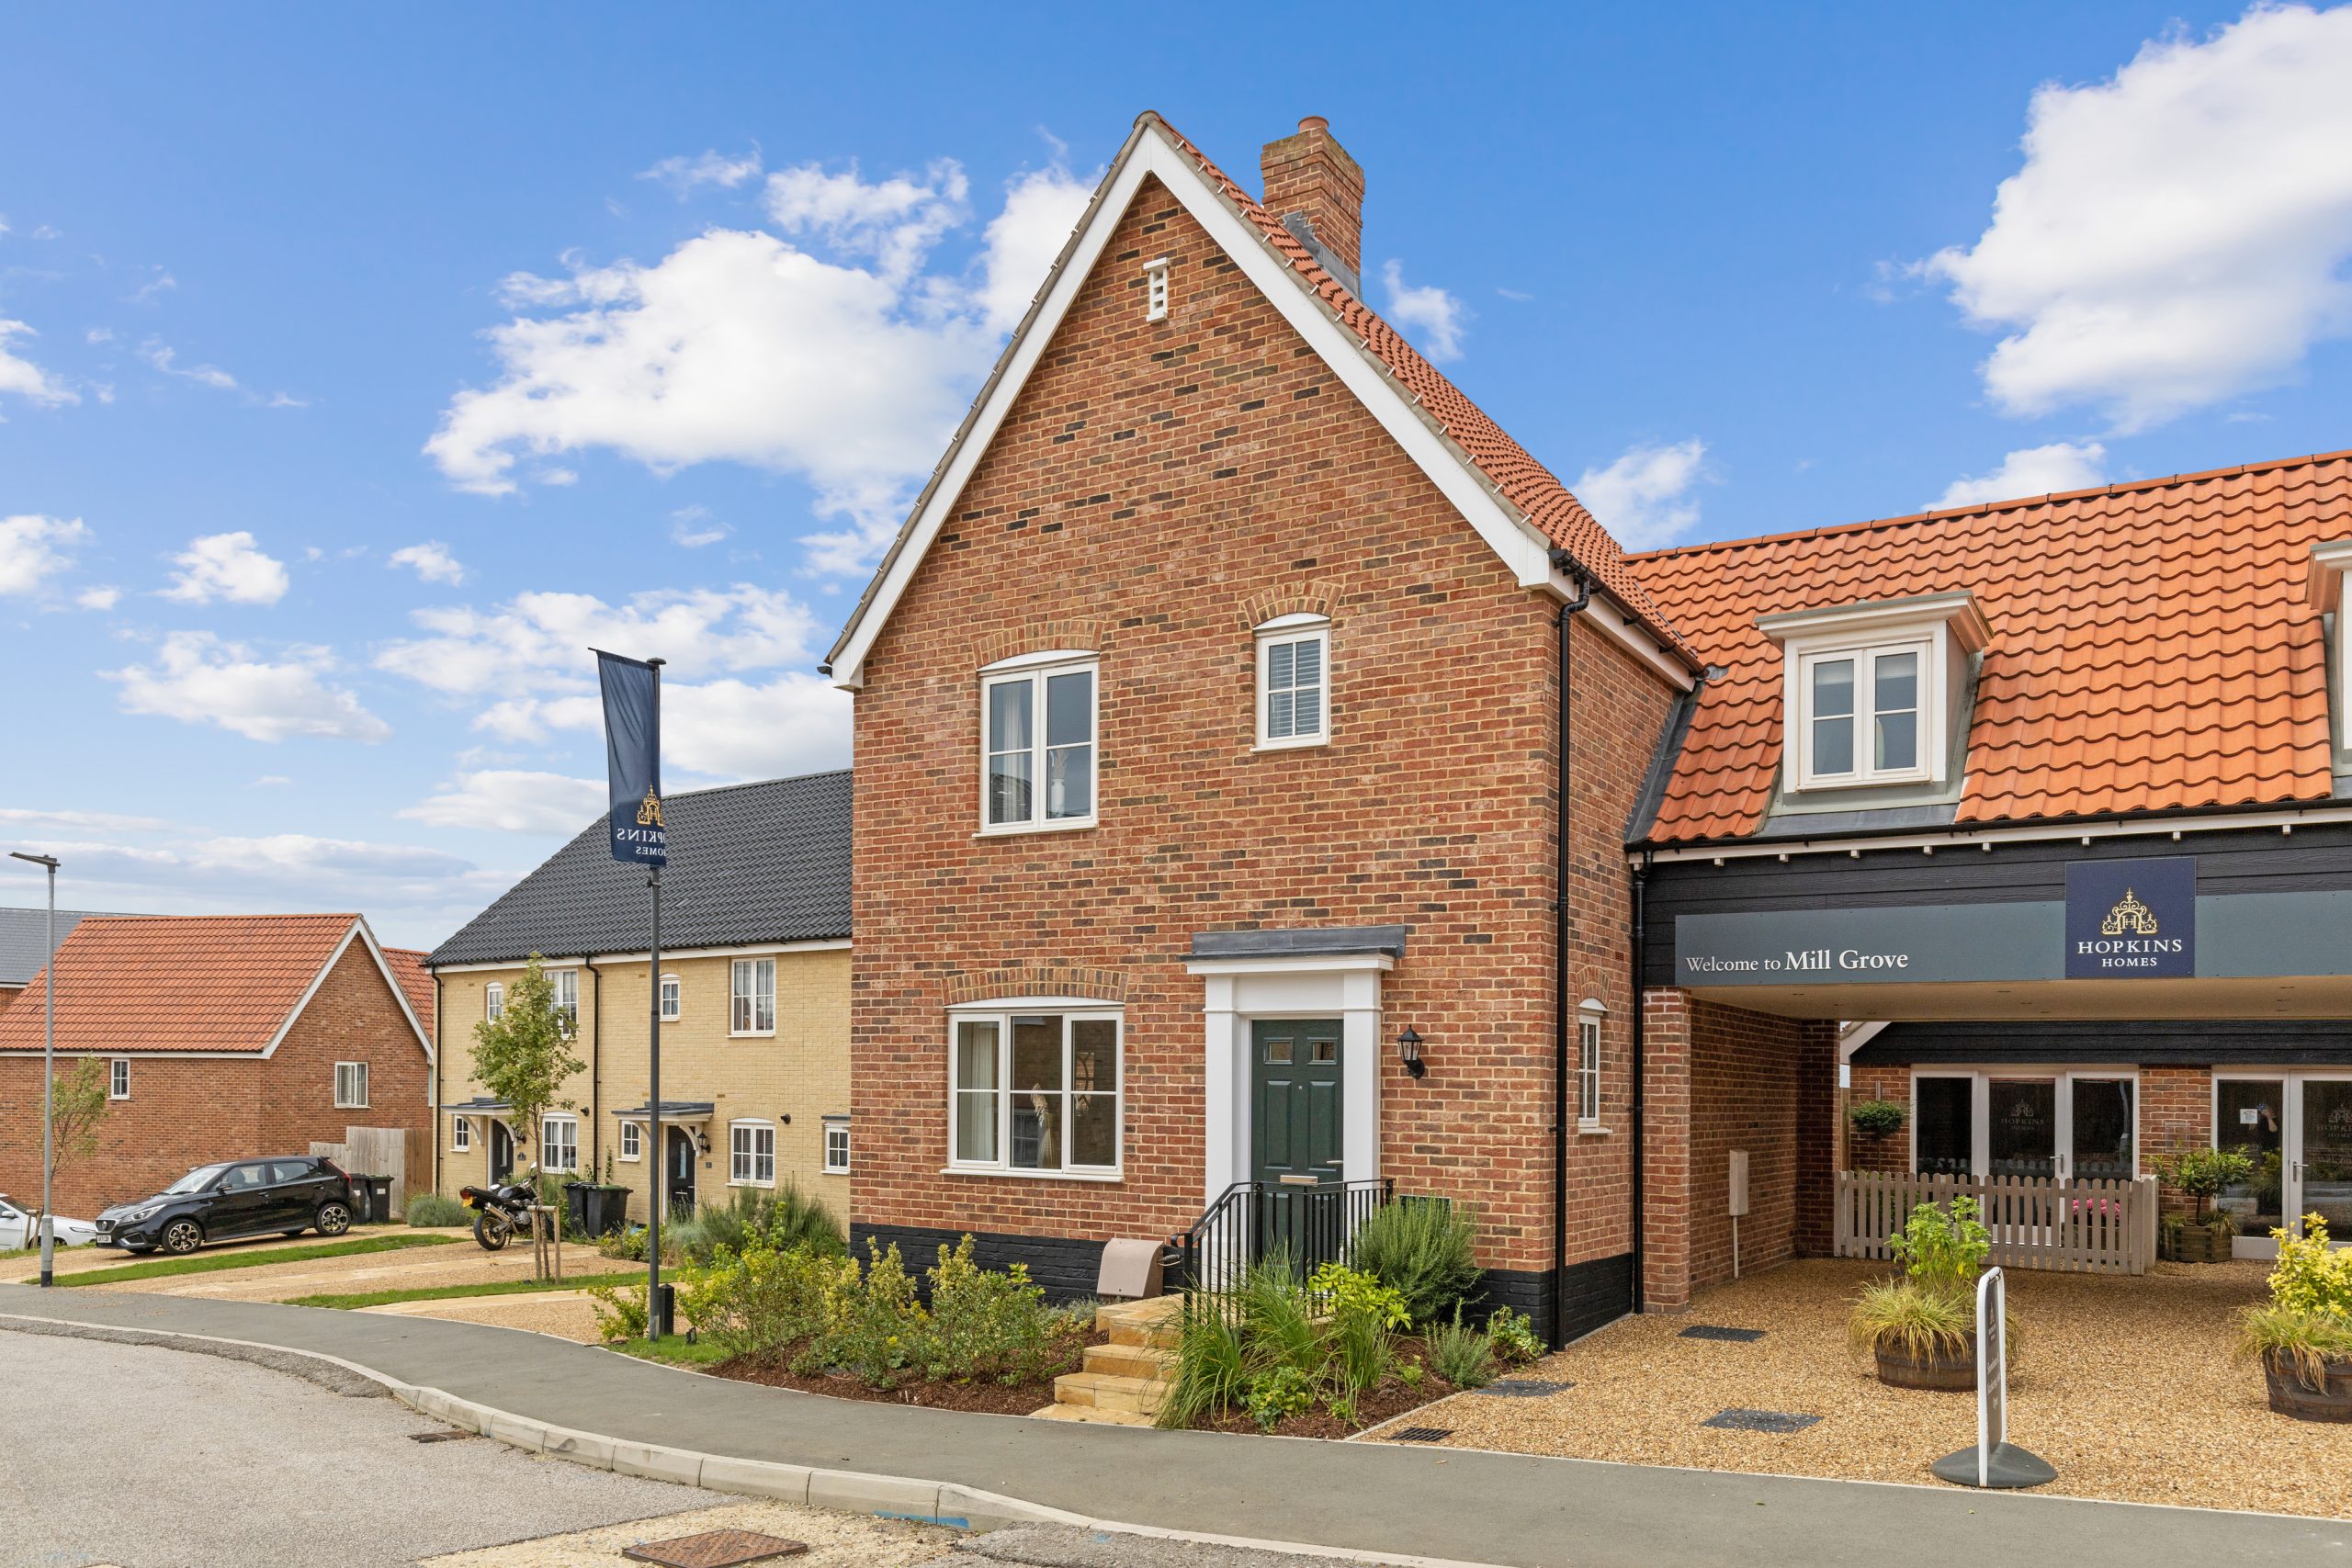 The Hopkins Homes view home at Mill Grove in Stowmarket, Suffolk